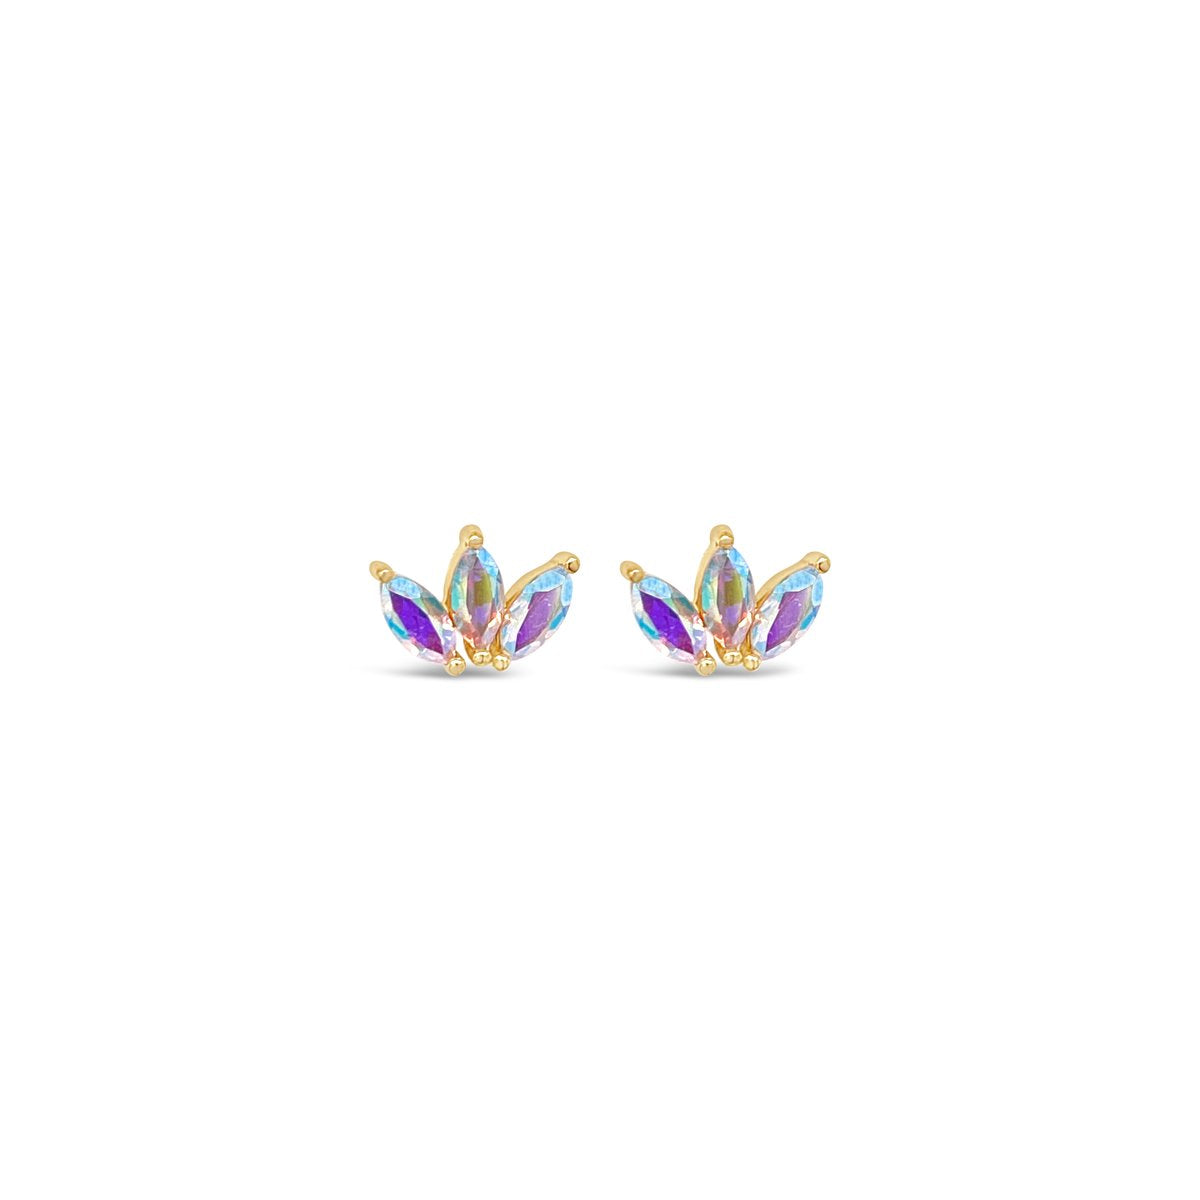 Moet - 14K Yellow Gold Triple Rainbow-hued Swarovski Mercury Mist Topaz  Zirconias good for Nostril, Flat, Helix, Conch, Tragus, Lobe, Lip -  perfect to add to your collection.  Threadless End by Buddha Organics.